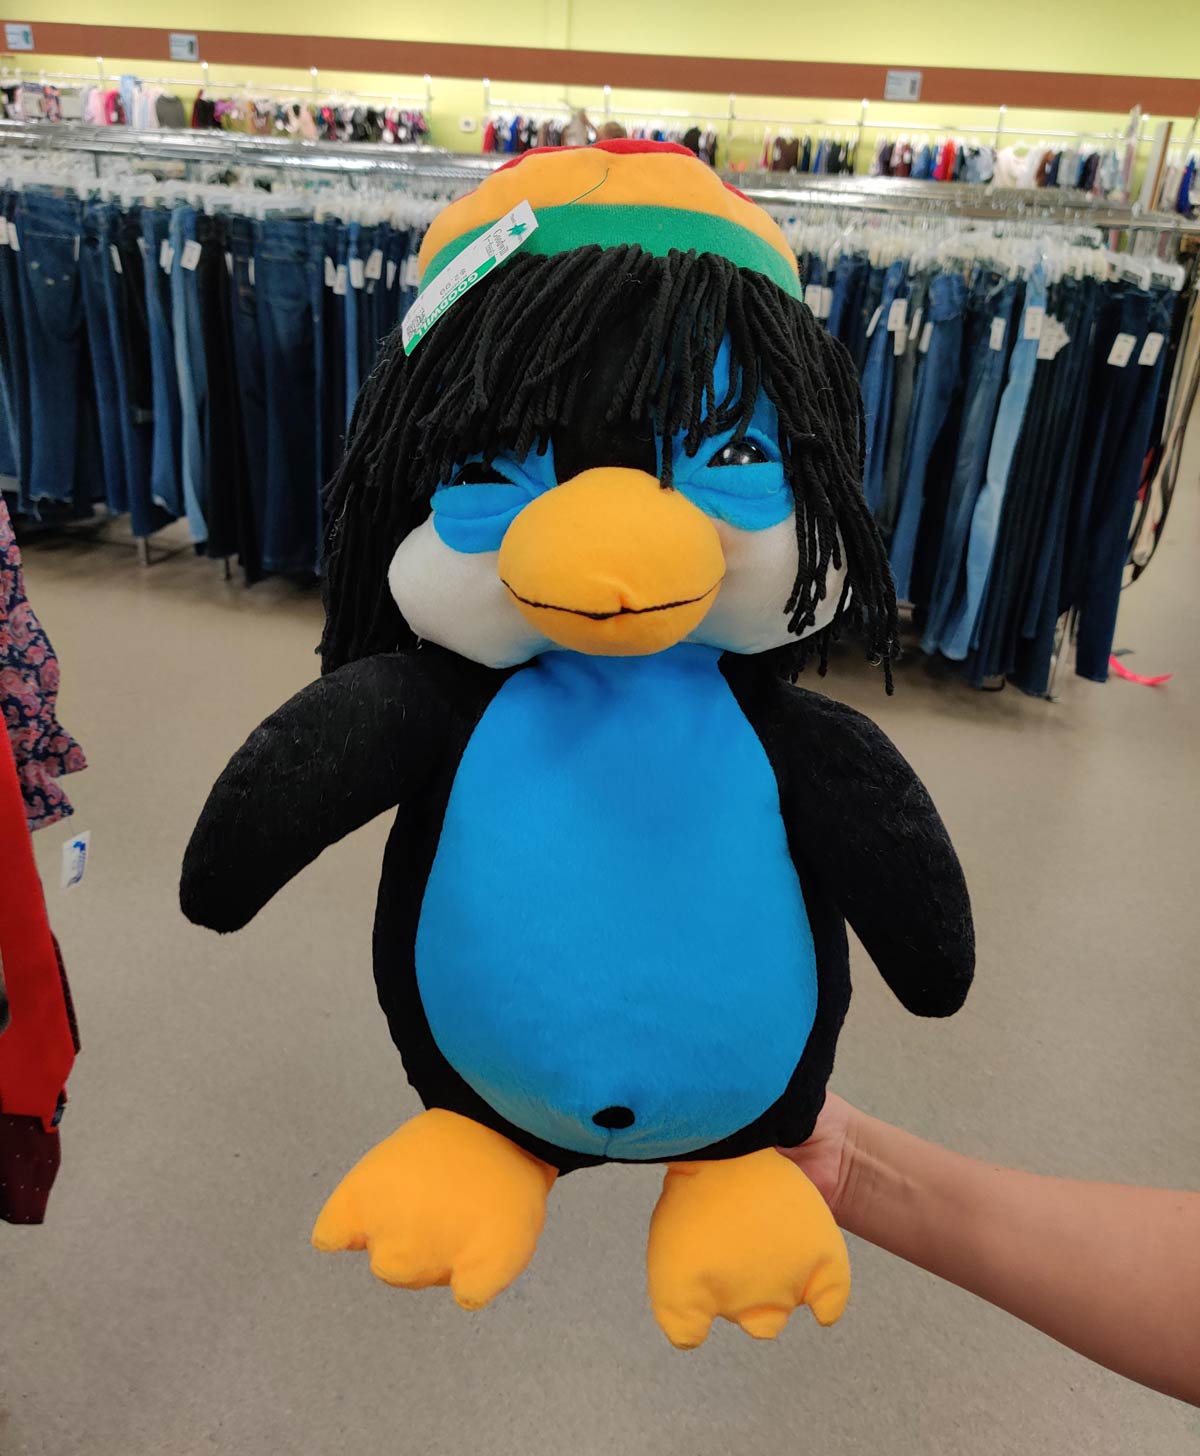 This penguin we found at a Goodwill